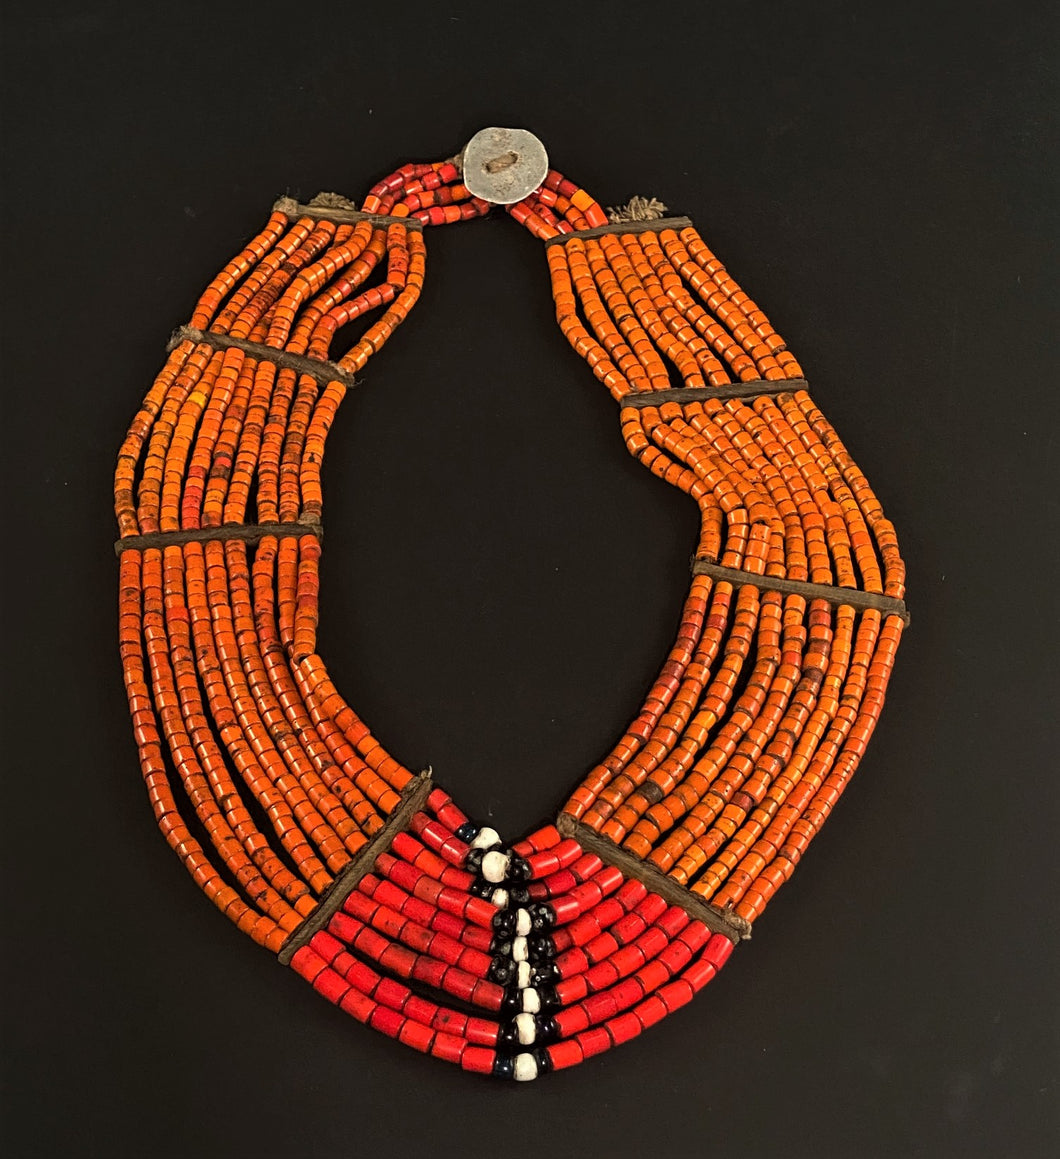 Naga Colorful Bead Necklace Collection